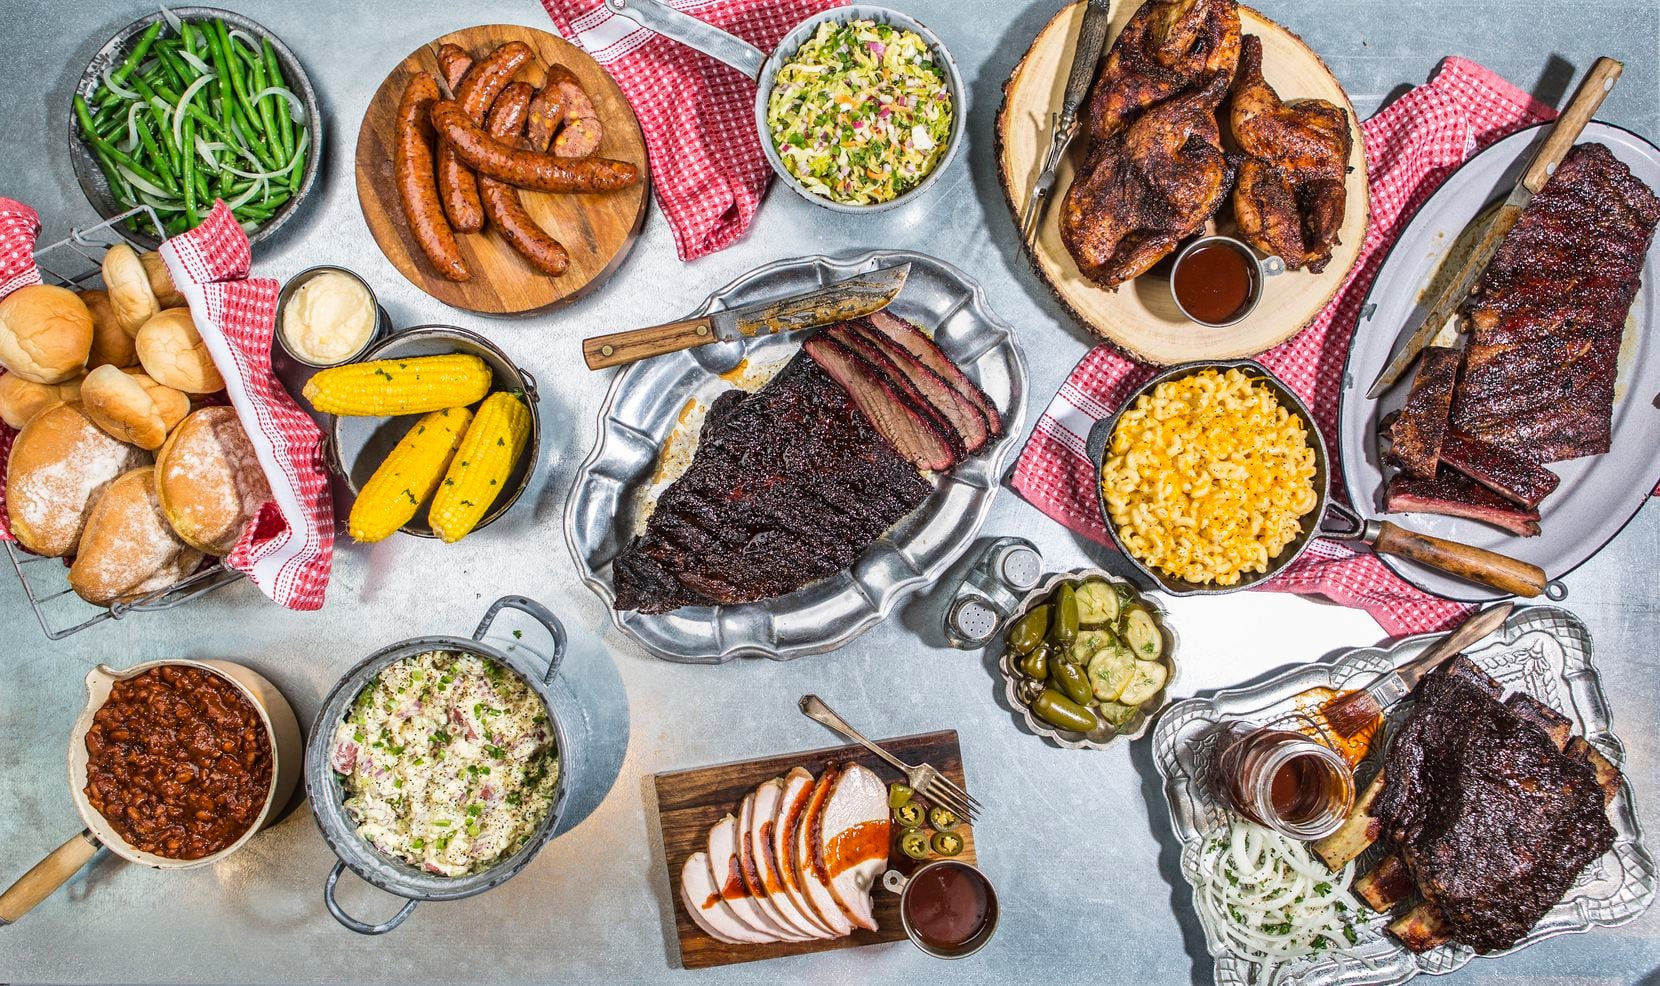 Ten50 BBQ offers a takeout bundle for the holidays.